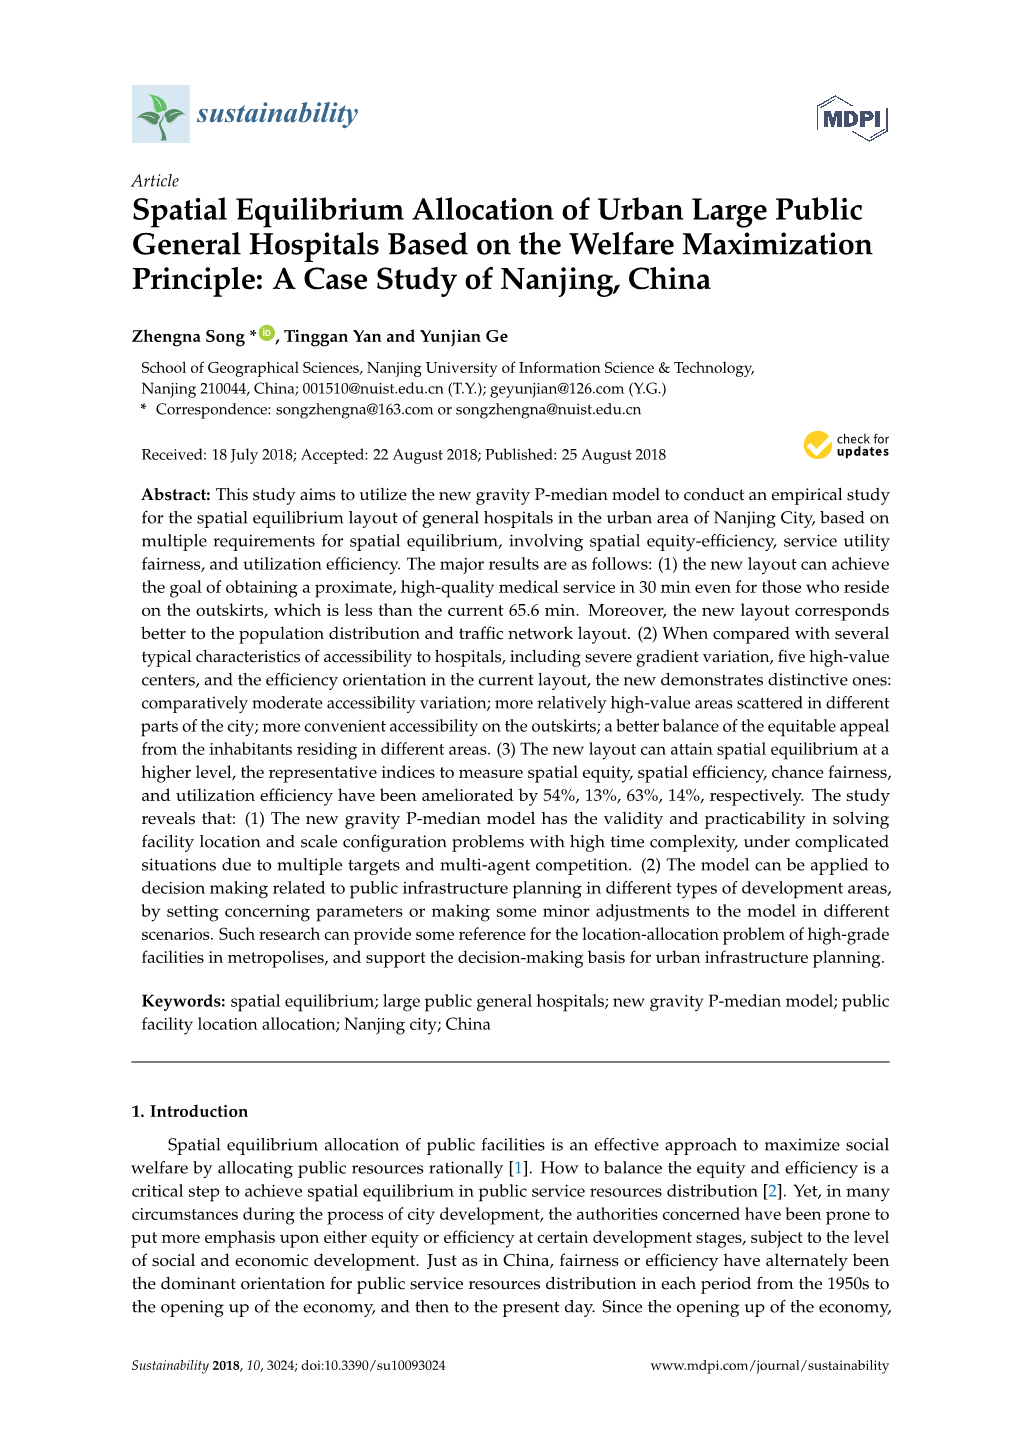 Spatial Equilibrium Allocation of Urban Large Public General Hospitals Based on the Welfare Maximization Principle: a Case Study of Nanjing, China